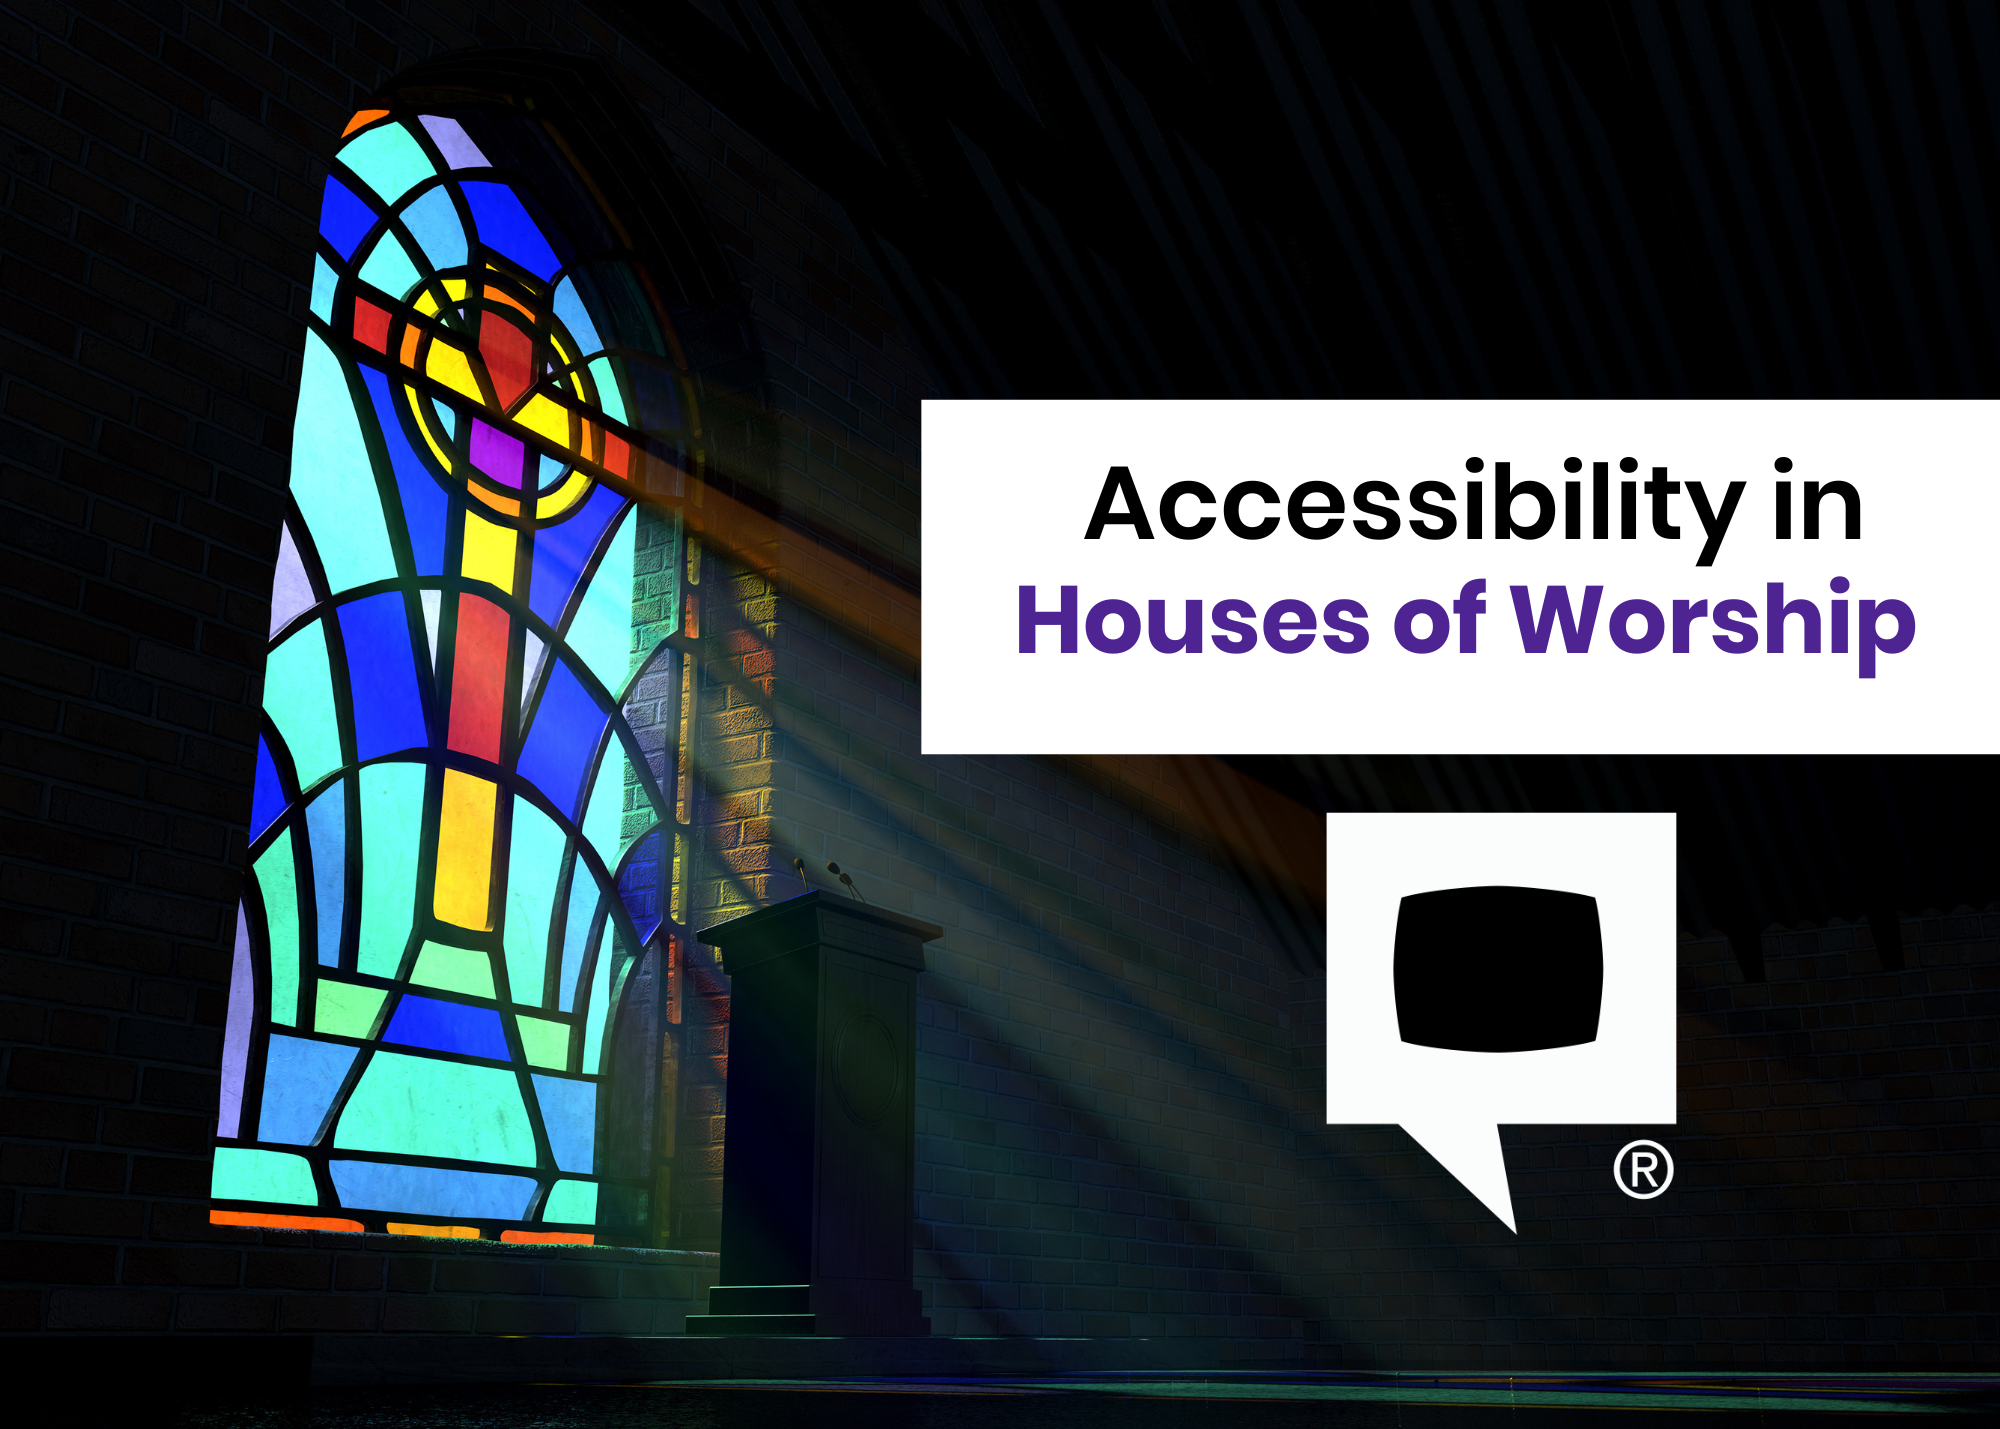 Accessibility in Houses of Worship